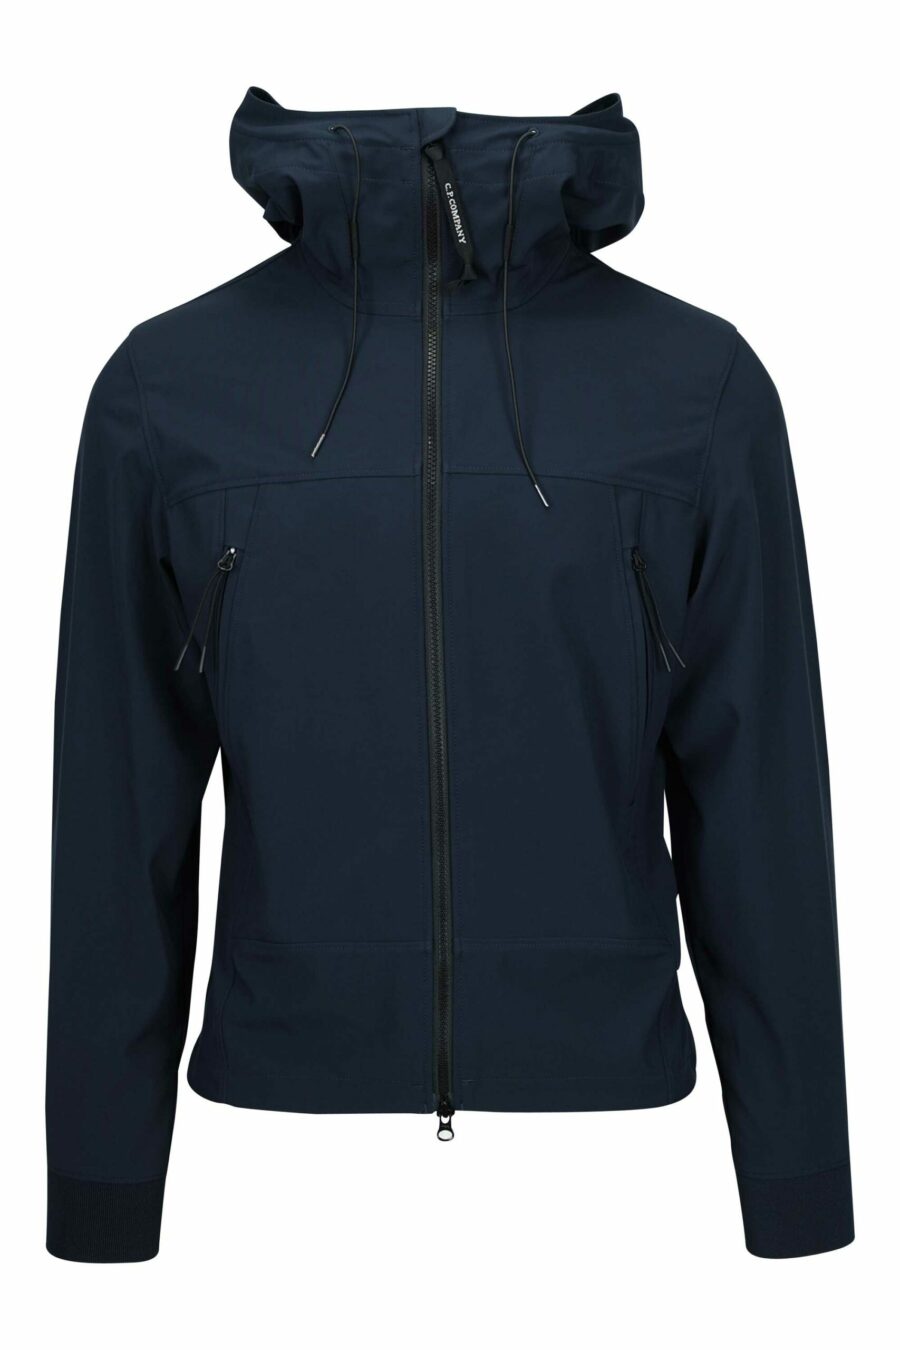 Dark blue jacket with hood and goggle logo - 7620943709568 scaled